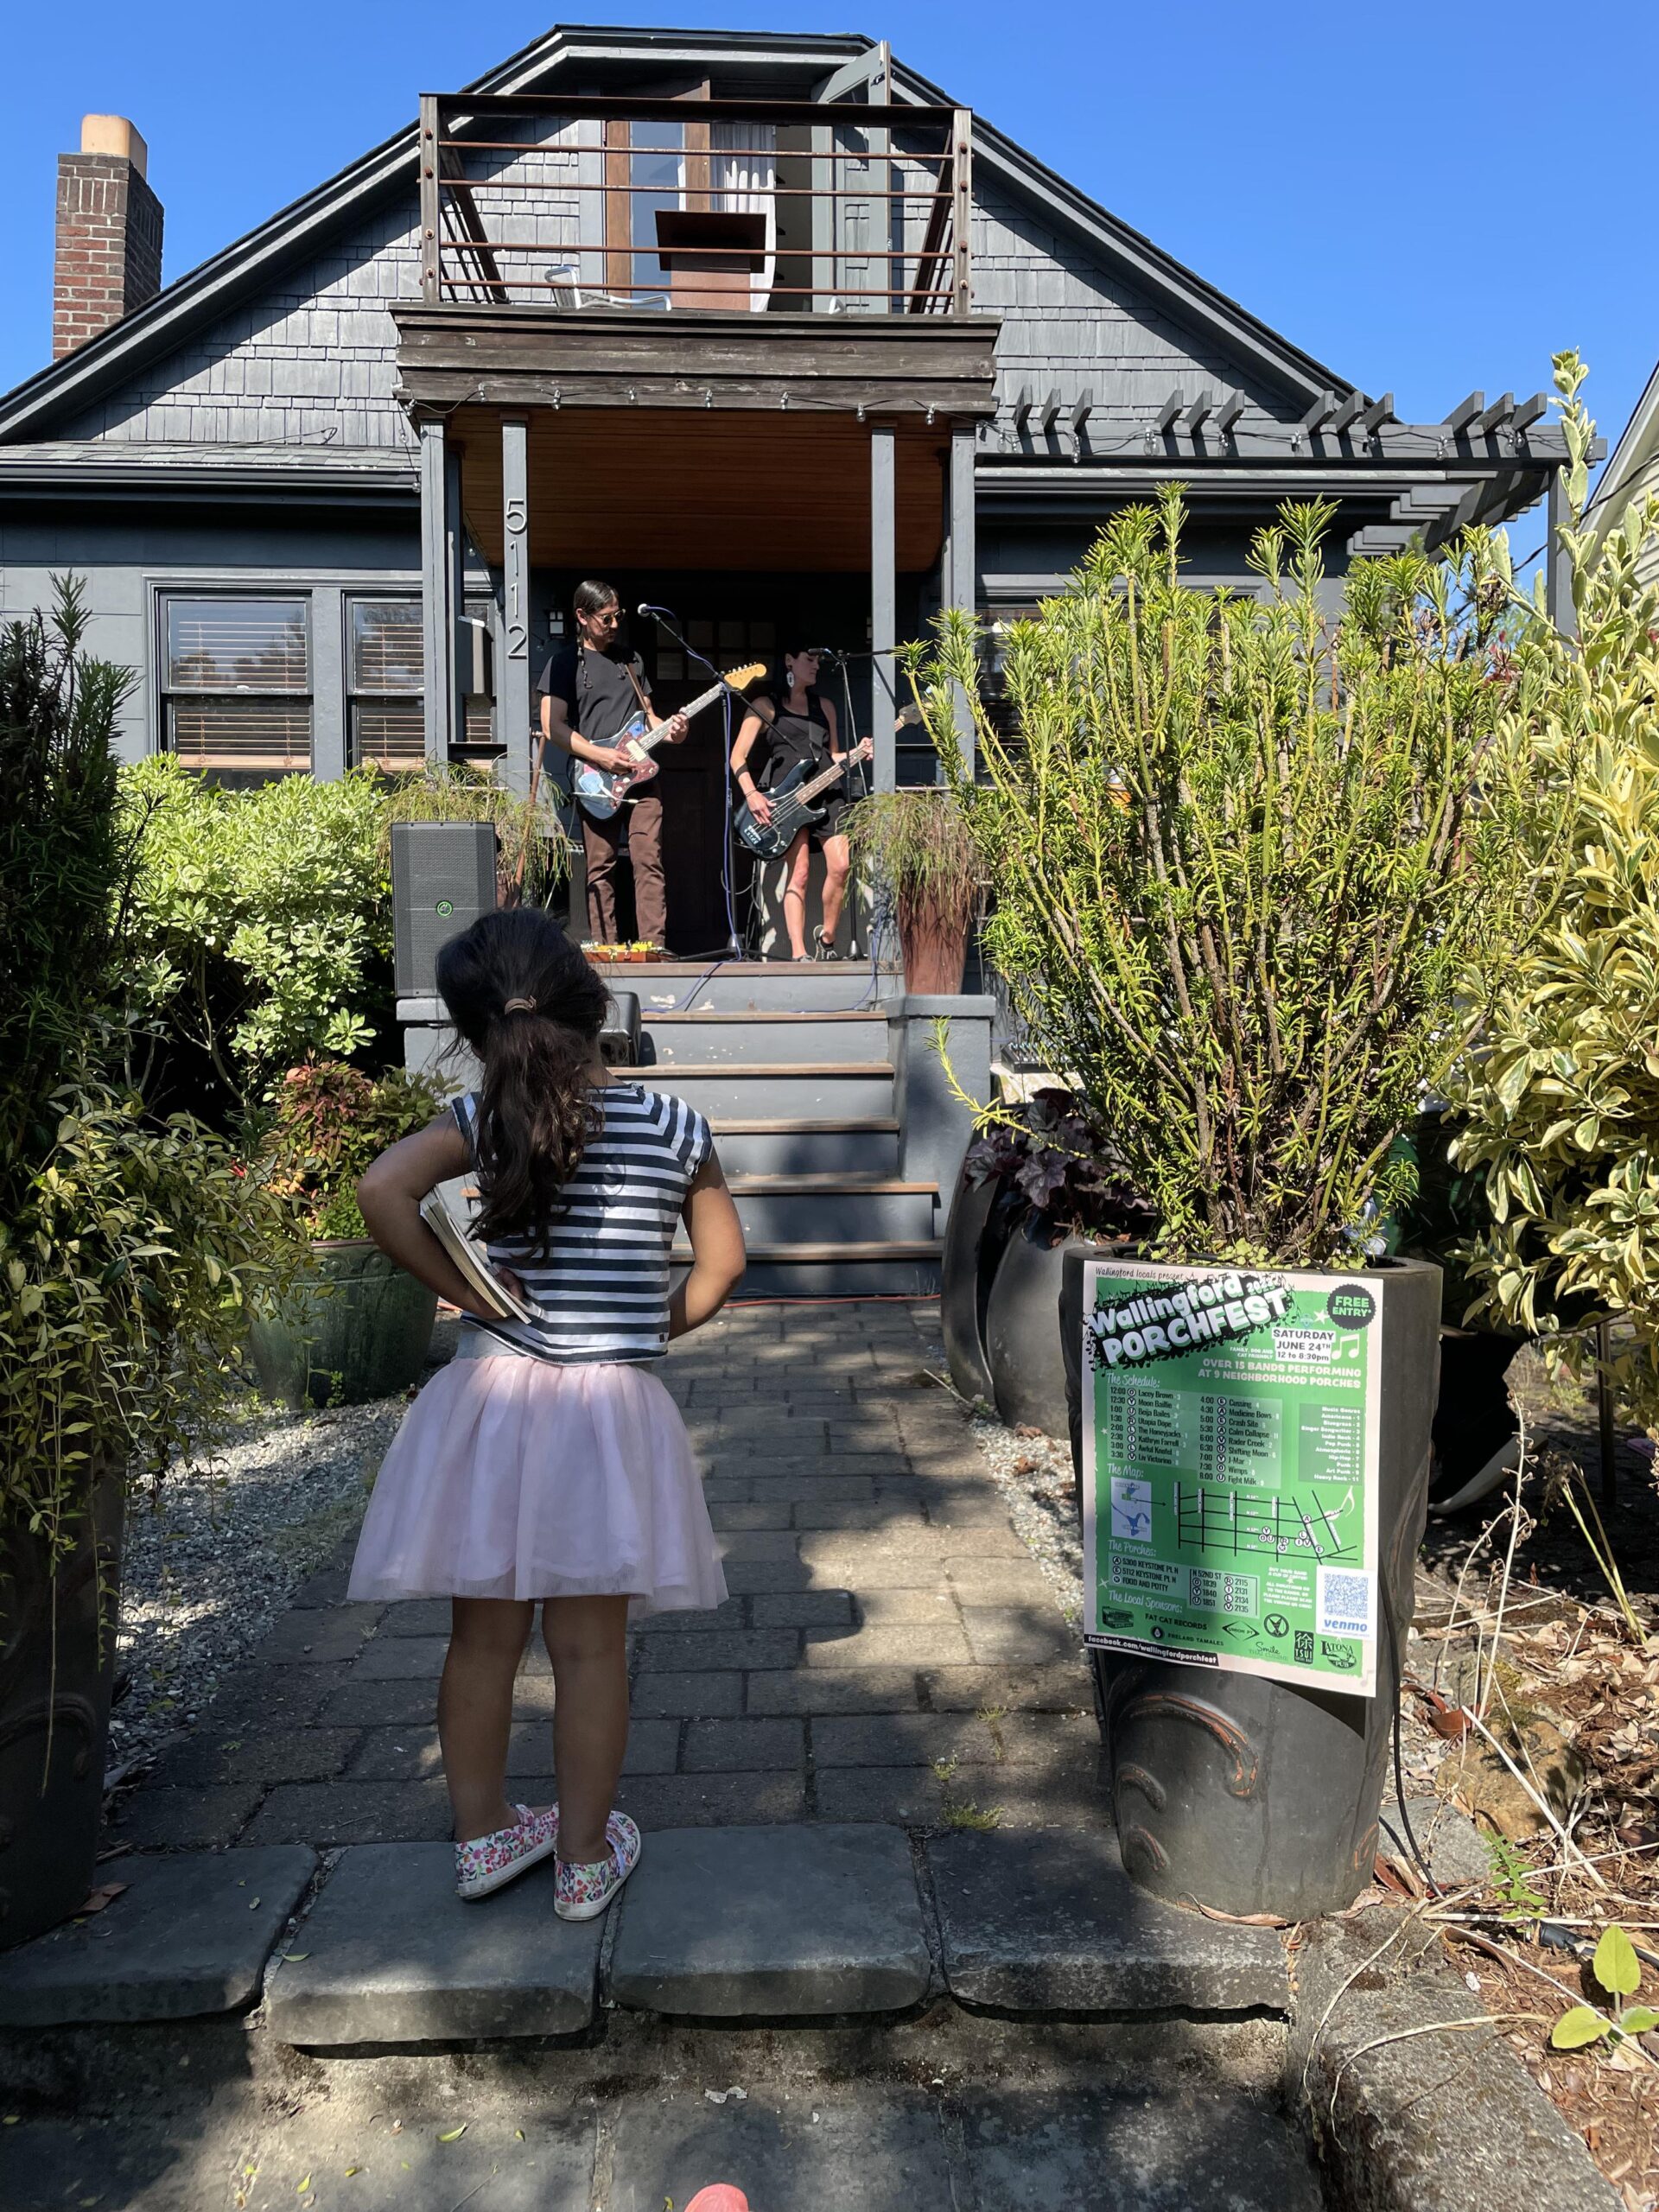 A young girl wearing a striped shirt and pink tutu watches two musicians perform on a residential front porch.